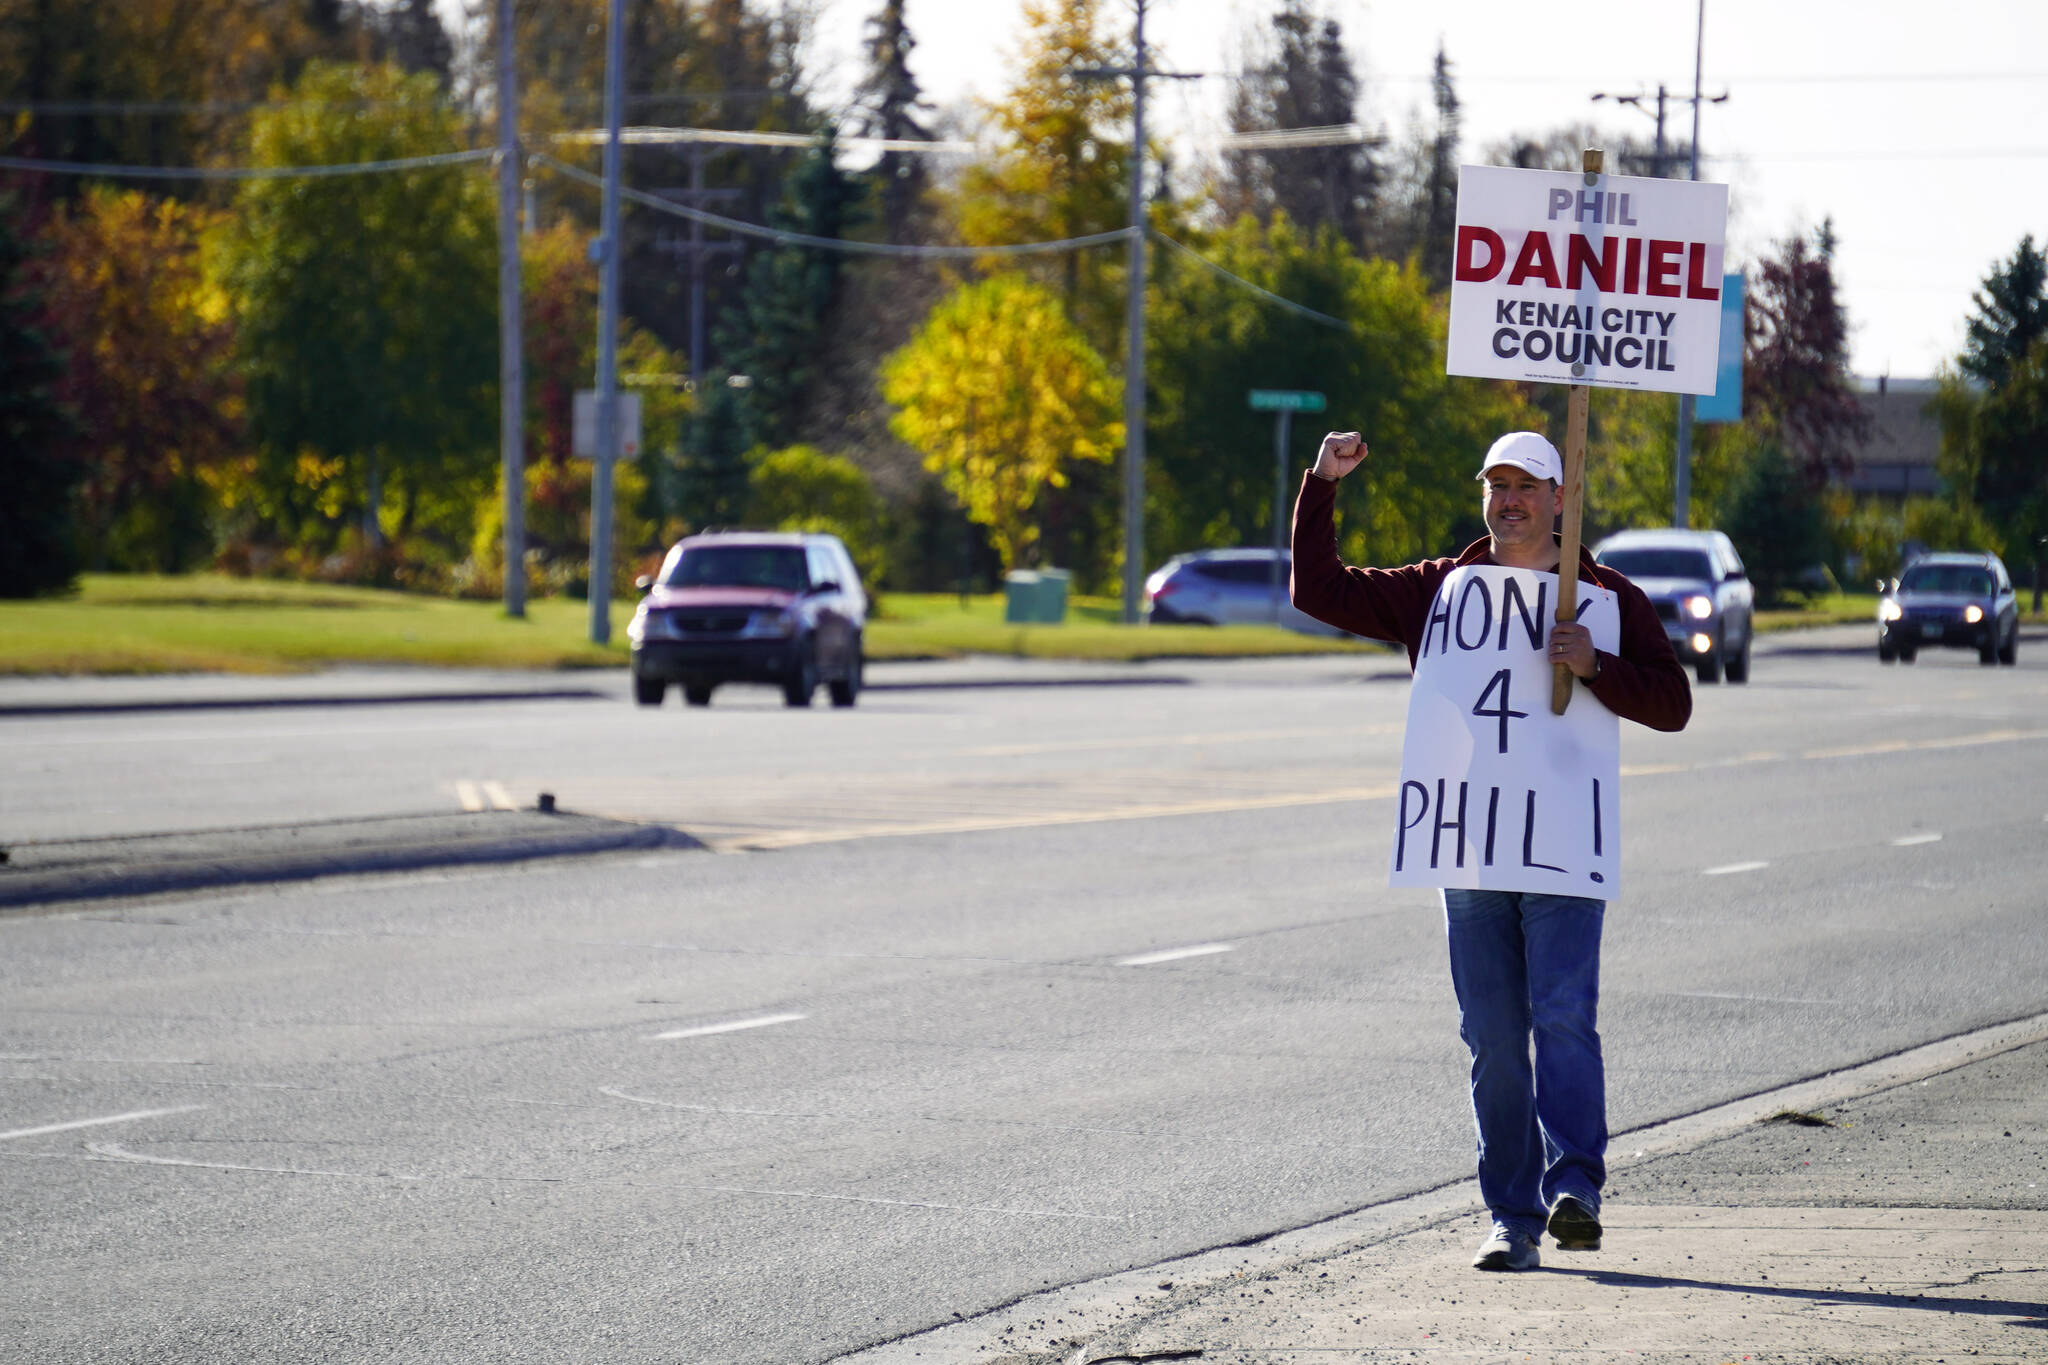 A supporter of Phil Daniel calls on drivers to honk their horns along the Kenai Spur Highway in Kenai, Alaska, during election day on Tuesday, Oct. 3, 2023. (Jake Dye/Peninsula Clarion)